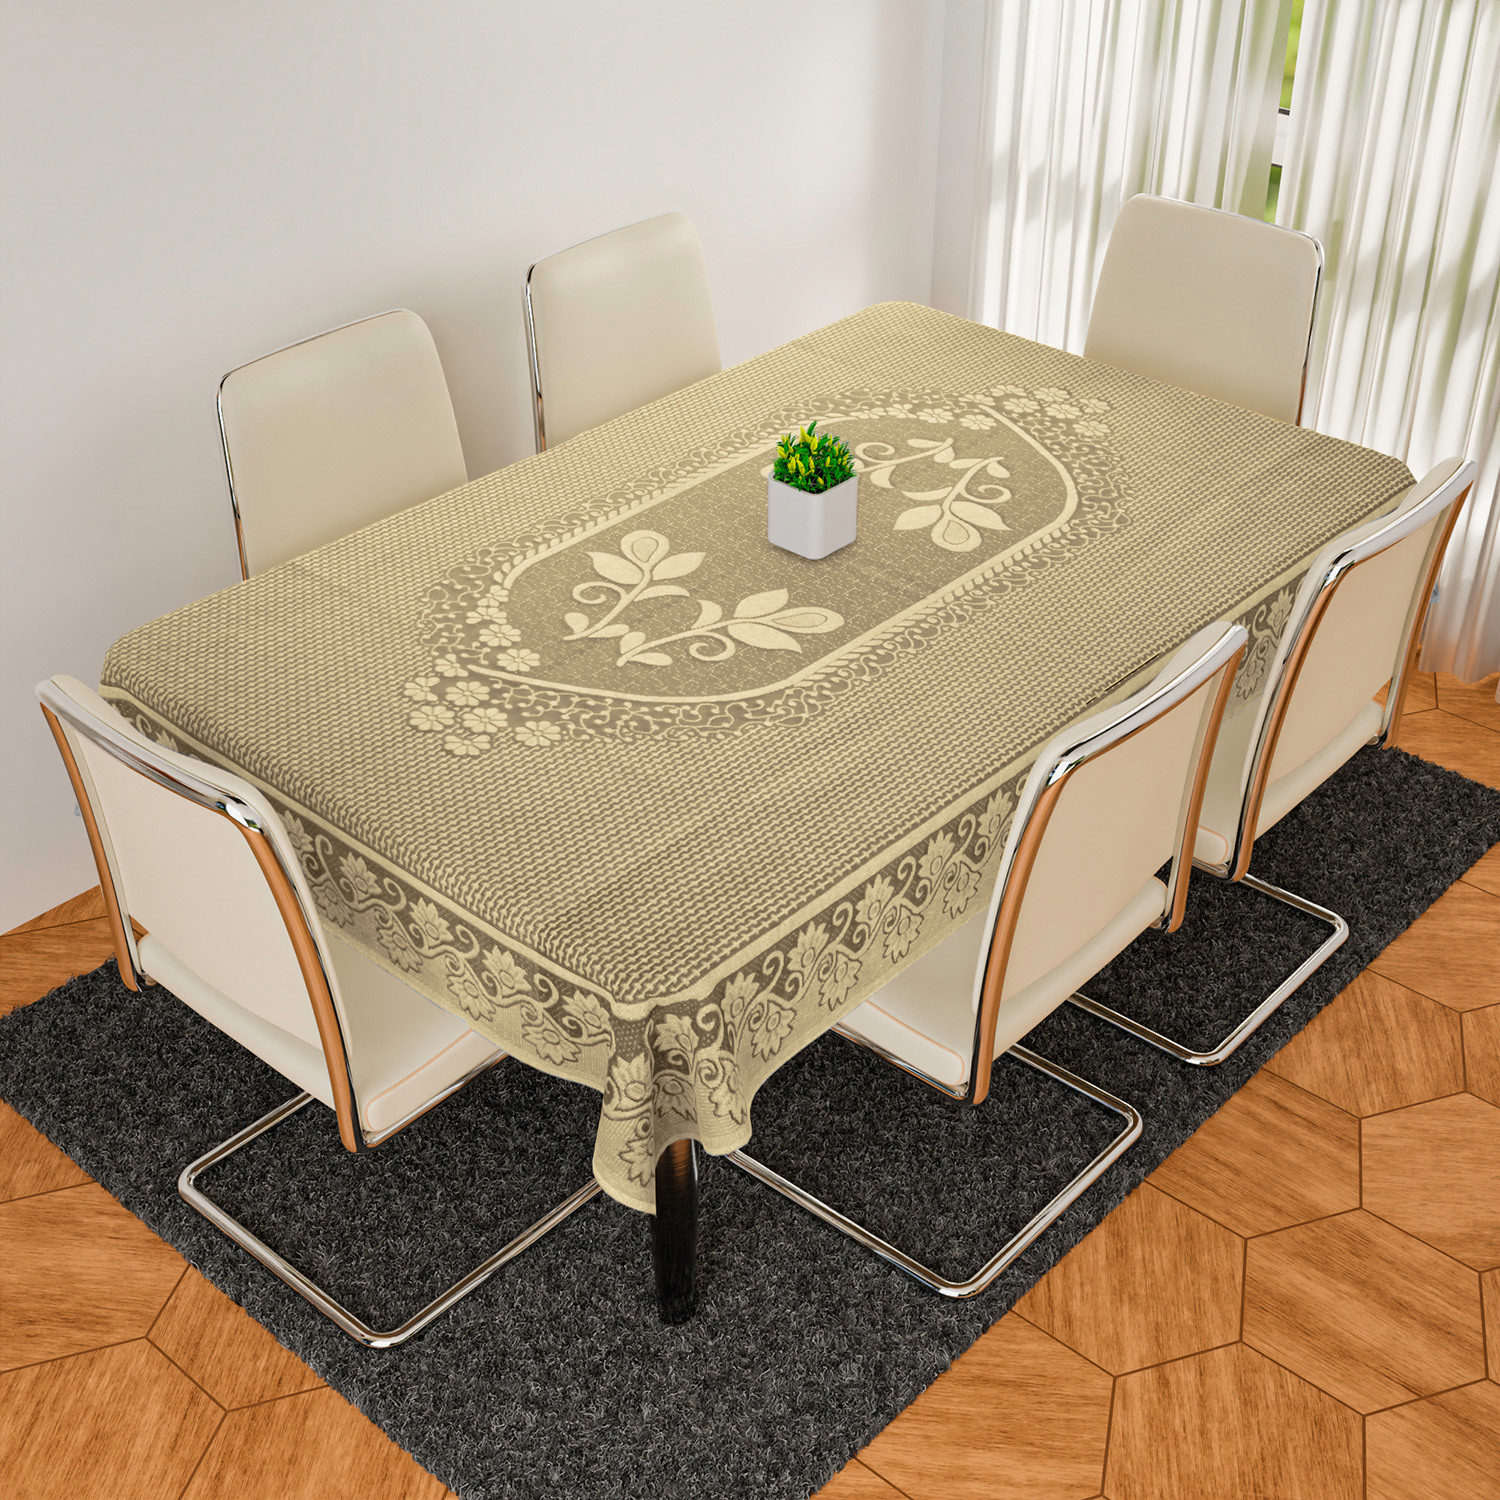 Kuber Industries Dining Table Cover| Luxurious Net Floral S-19 Design|Cotton Anti Skid & Waterproof Tablecloth for Home Decoration|60X90 Inch (Cream)